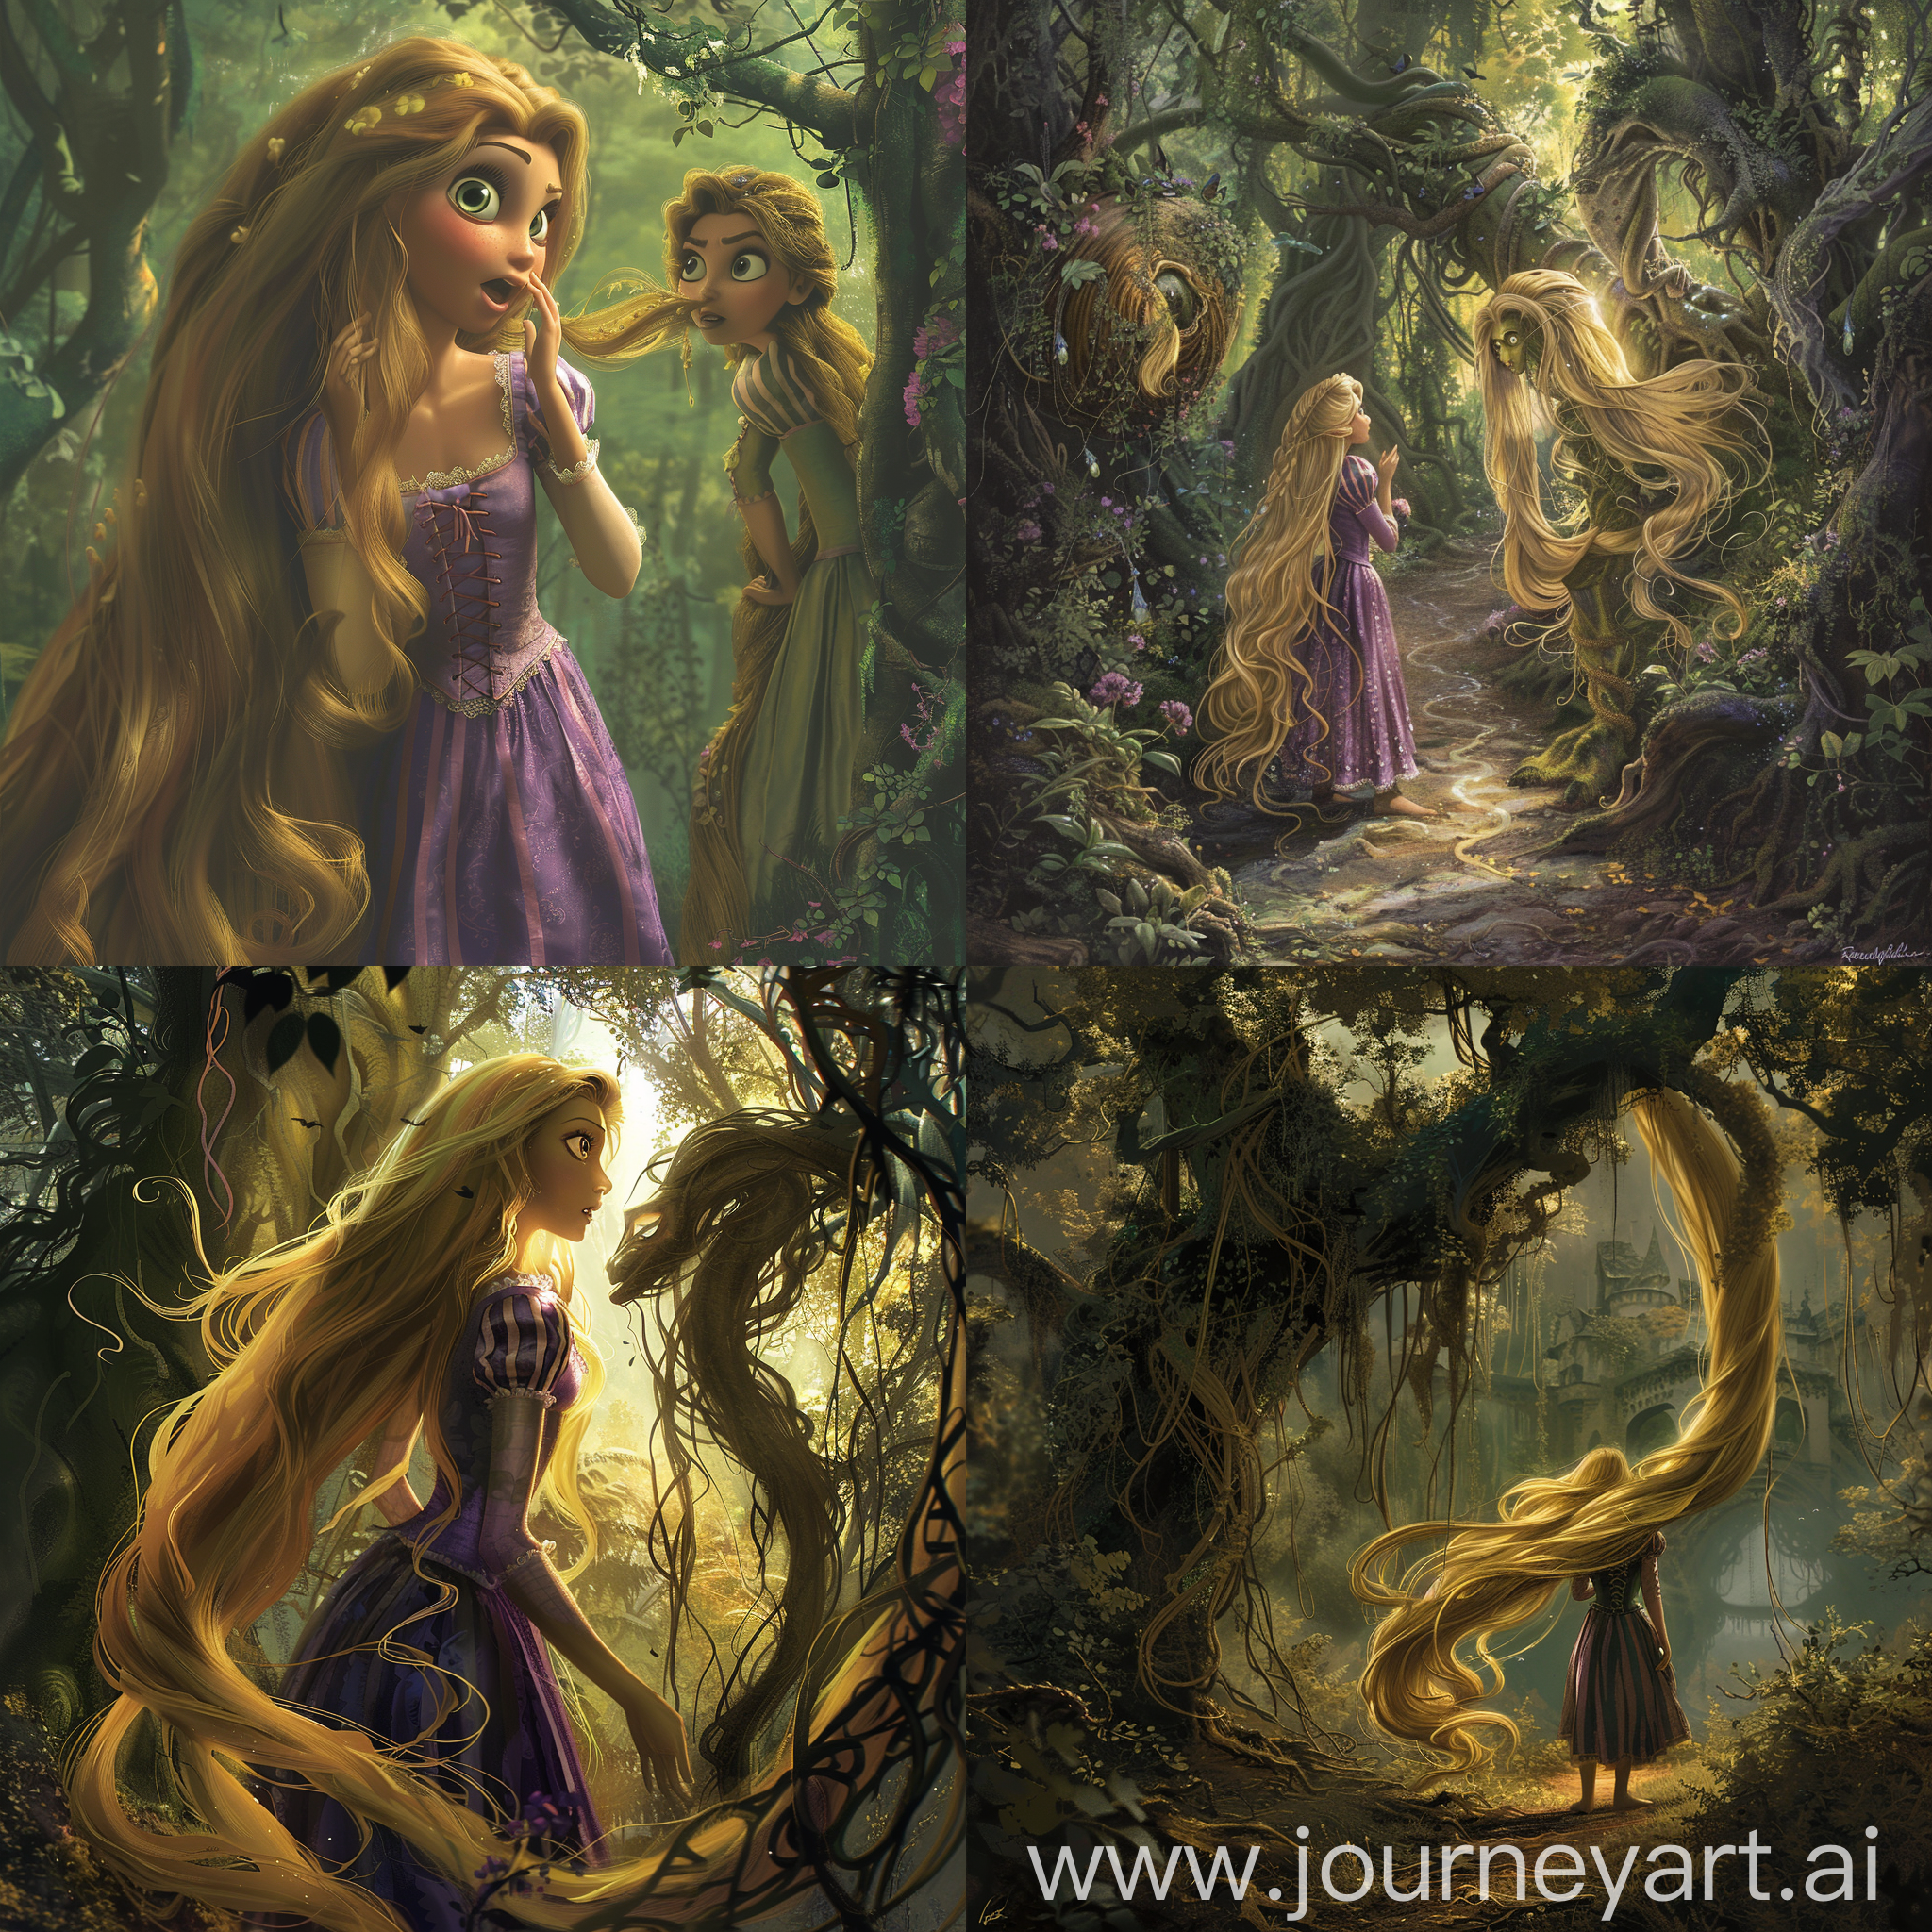 "Rapunzel, amidst her journey through the enchanted forest, encounters a mysterious creature whispering secrets of her destiny. Describe her reaction and the choices she faces as she navigates the unknown path ahead."